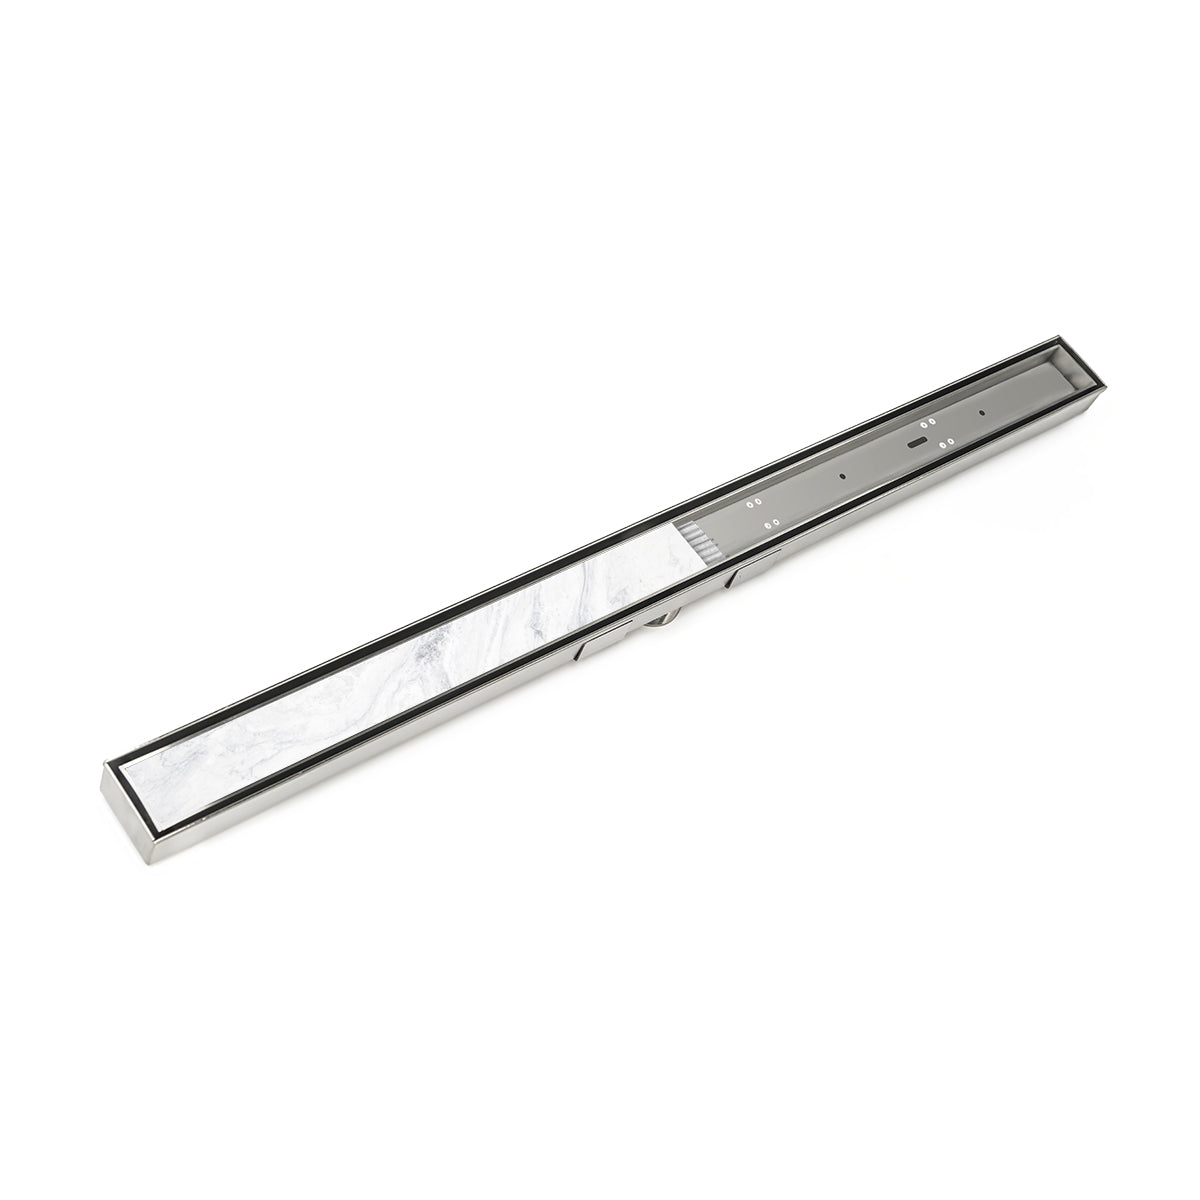 Infinity Drain 48" S-Stainless Steel Series High Flow Site Sizable Linear Drain Kit with Low Profile Tile Insert Frame with Cast Iron Drain Body, 3" No Hub Outlet